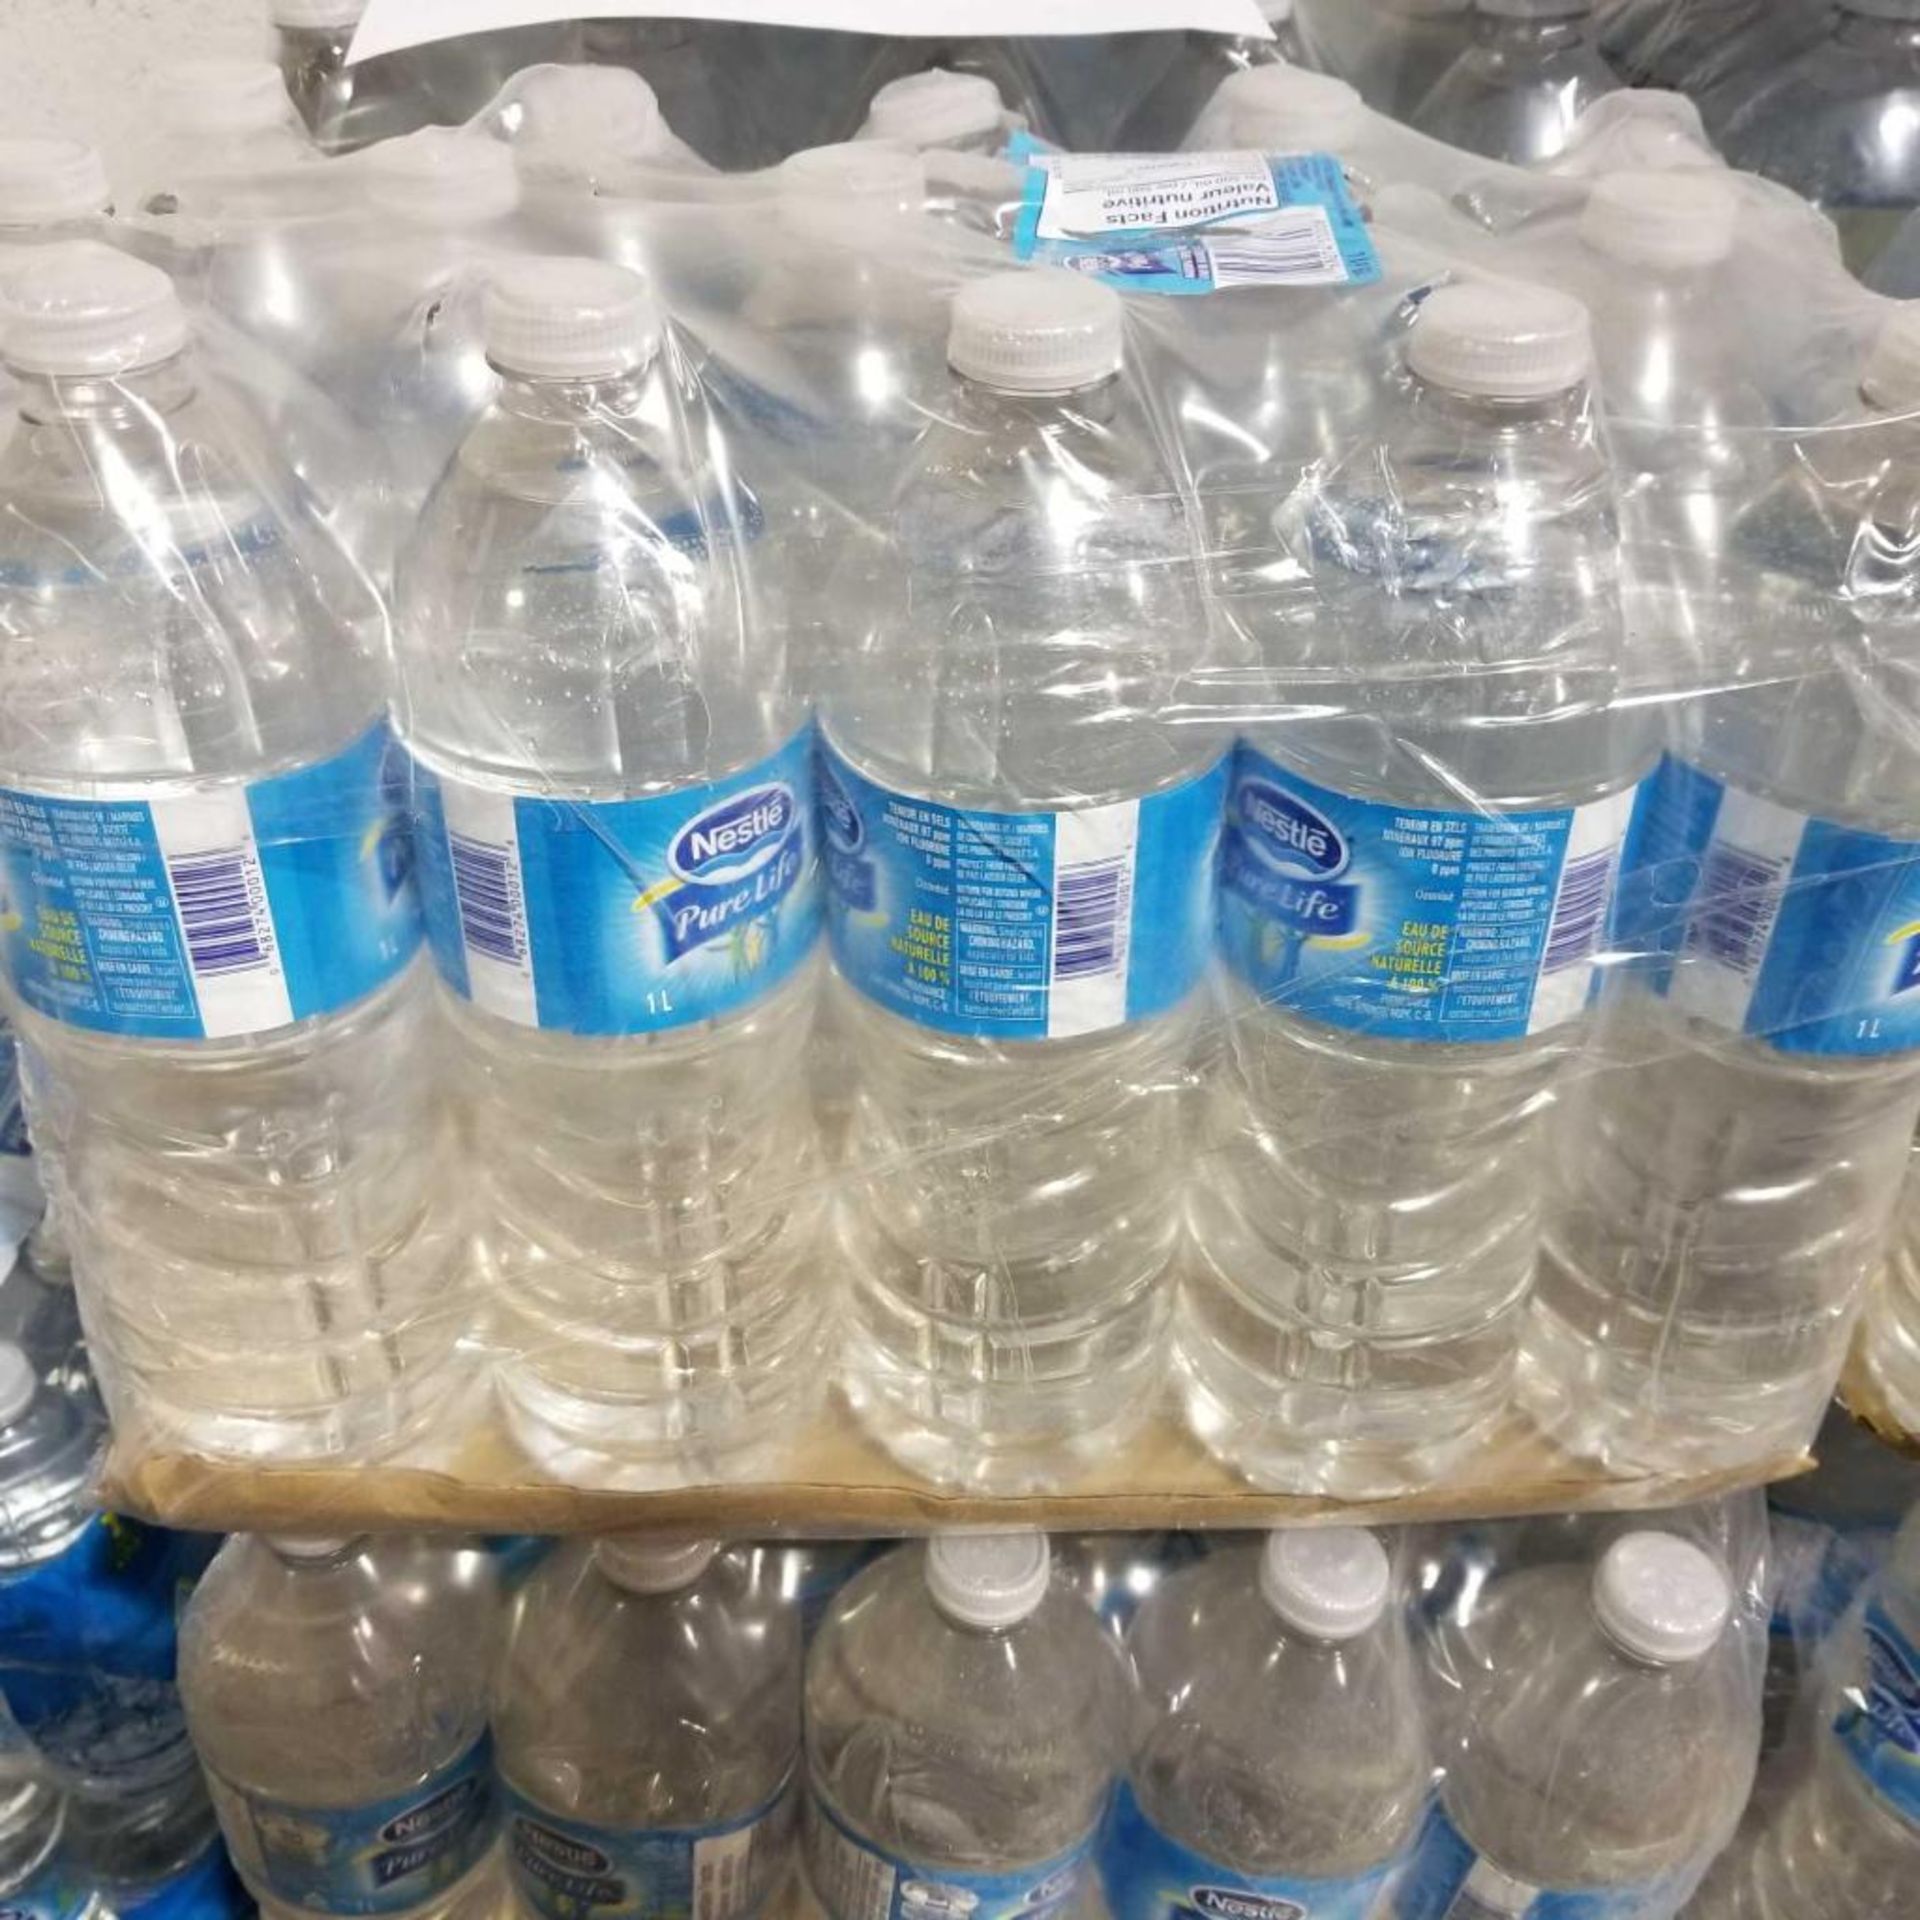 Case of 12 x 1 L Nestle Pure life water